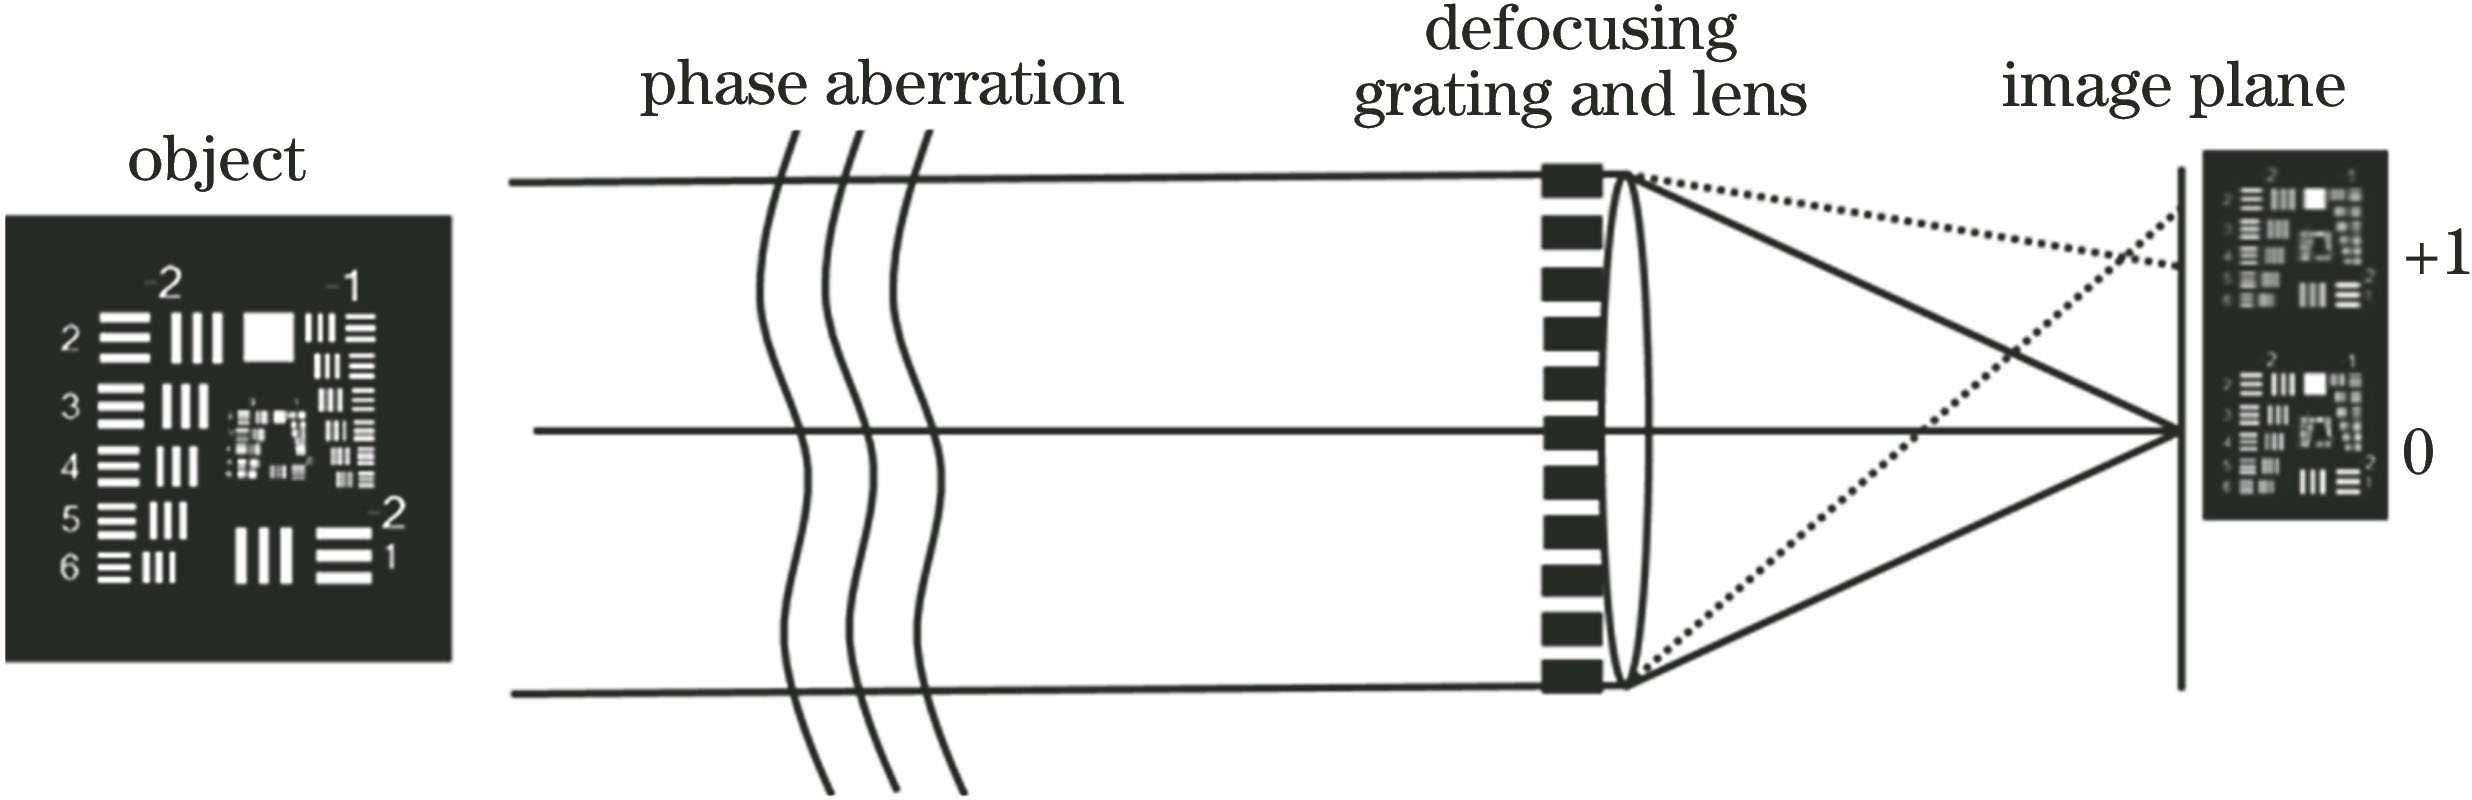 Image acquisition schematic of phase diversity method combined with defocusing grating